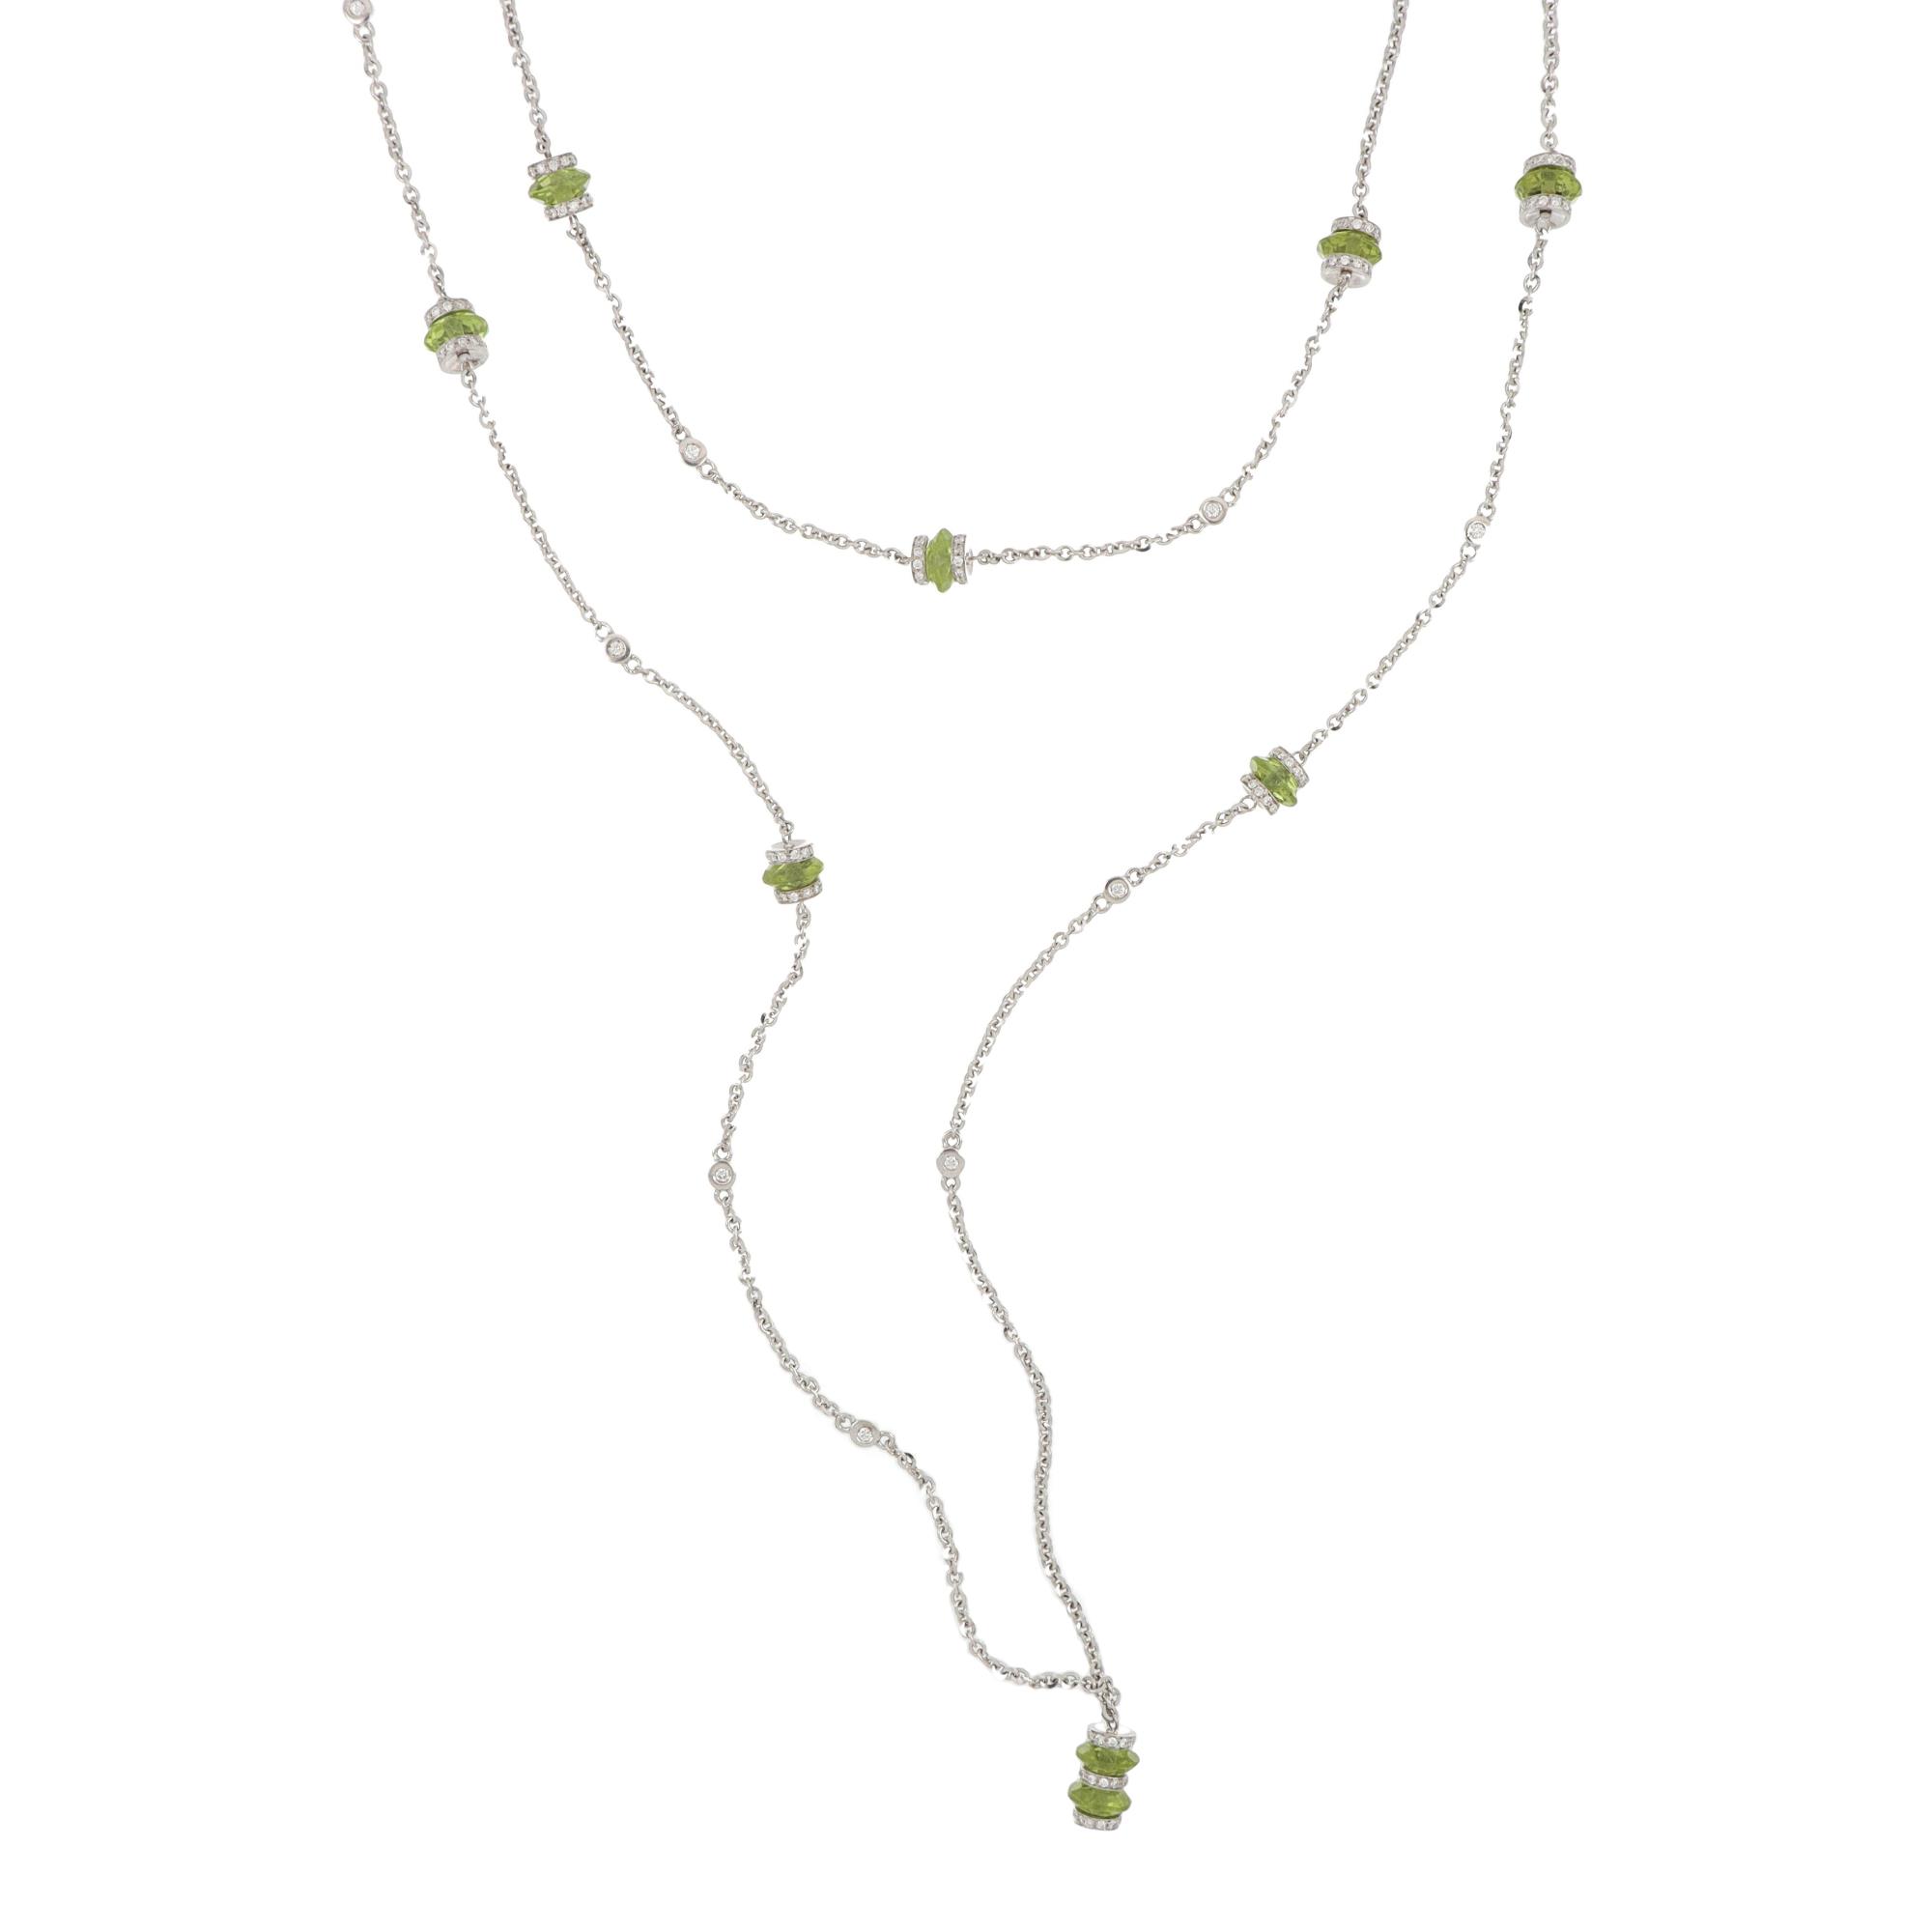 Long gold necklace with diamonds and peridot - GOLD ART